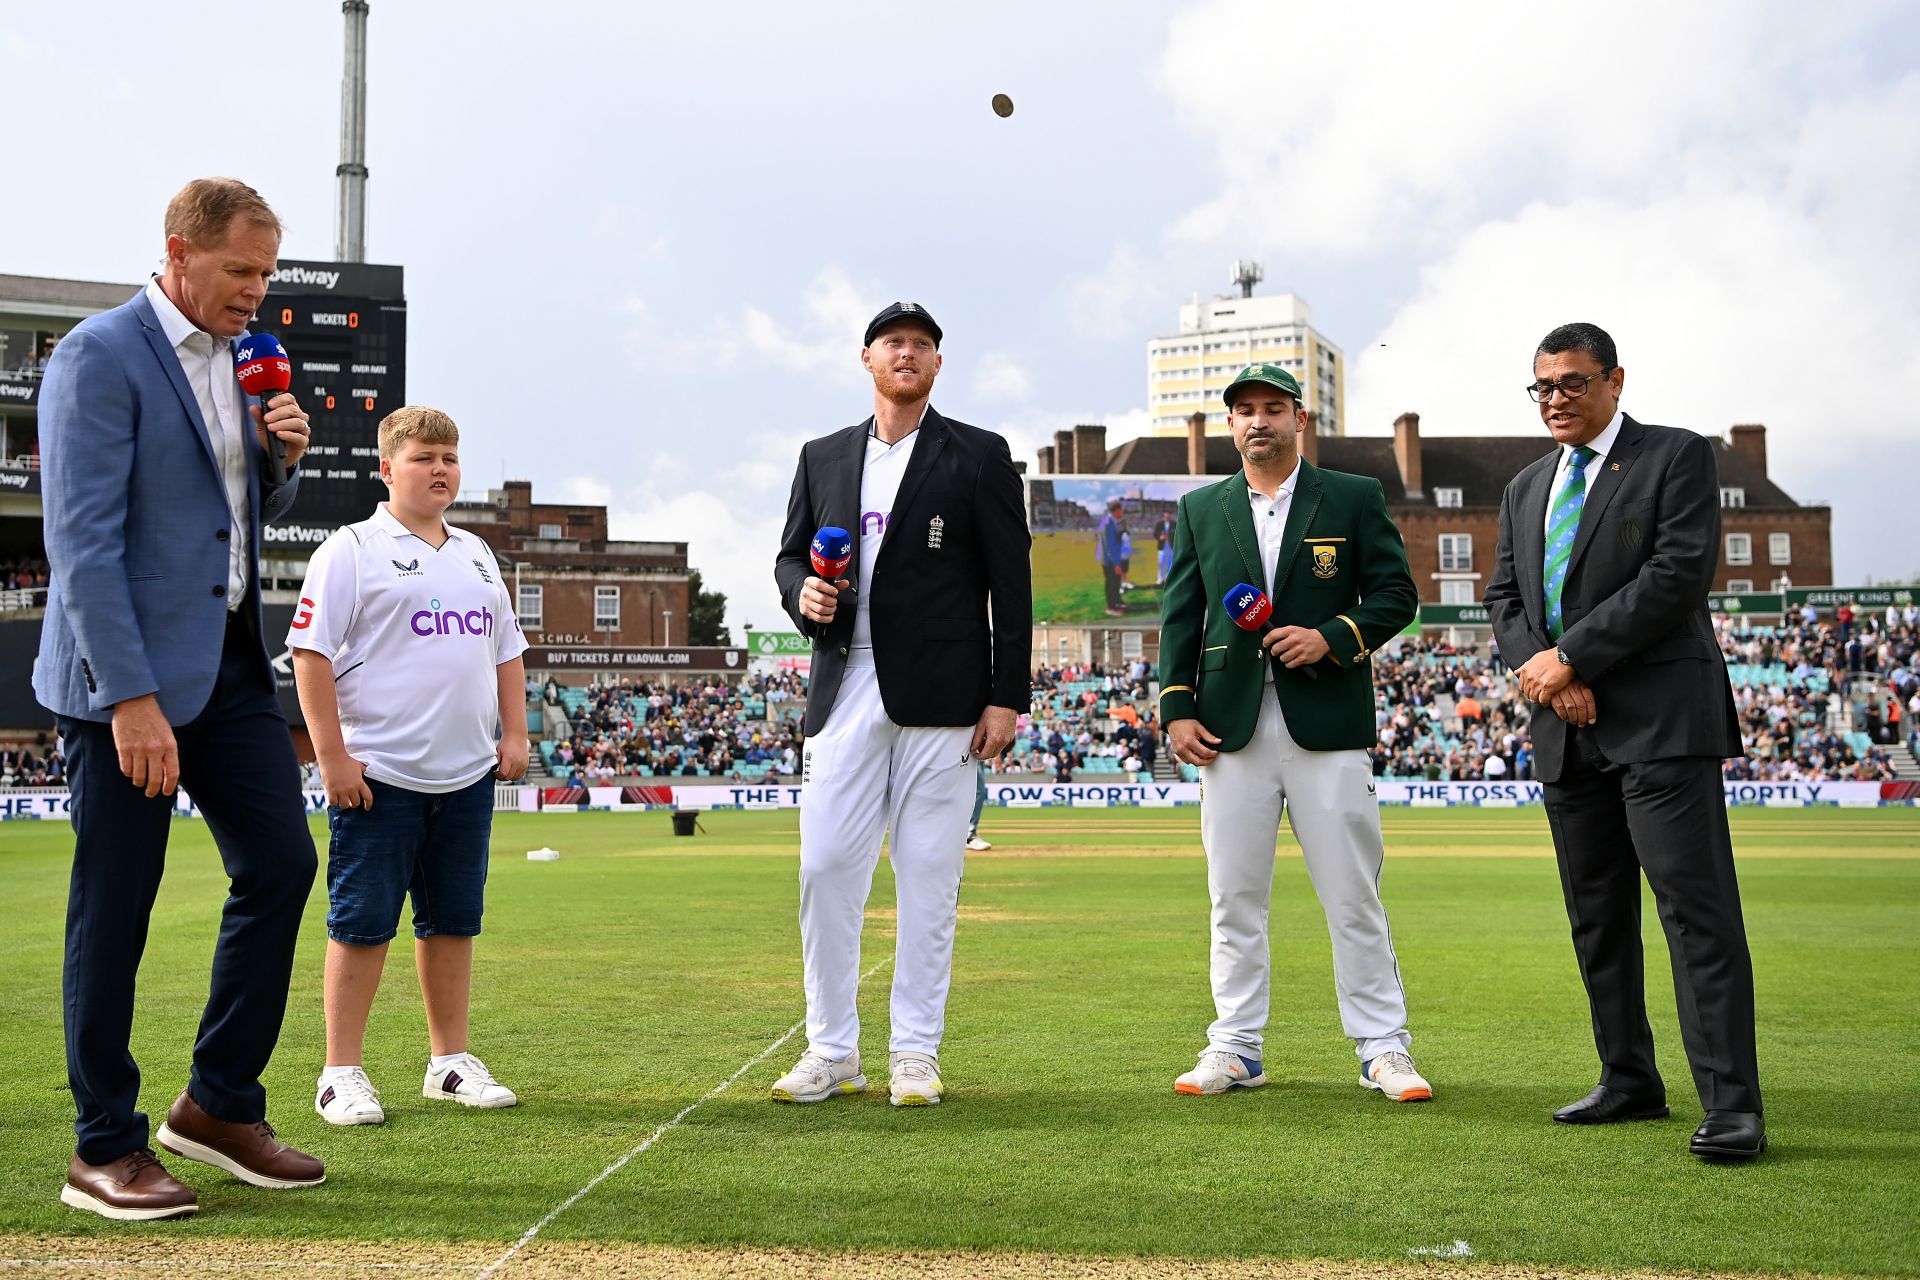 Ben Stokes and Dean Elgar appearing for the toss. (Credits: Getty)